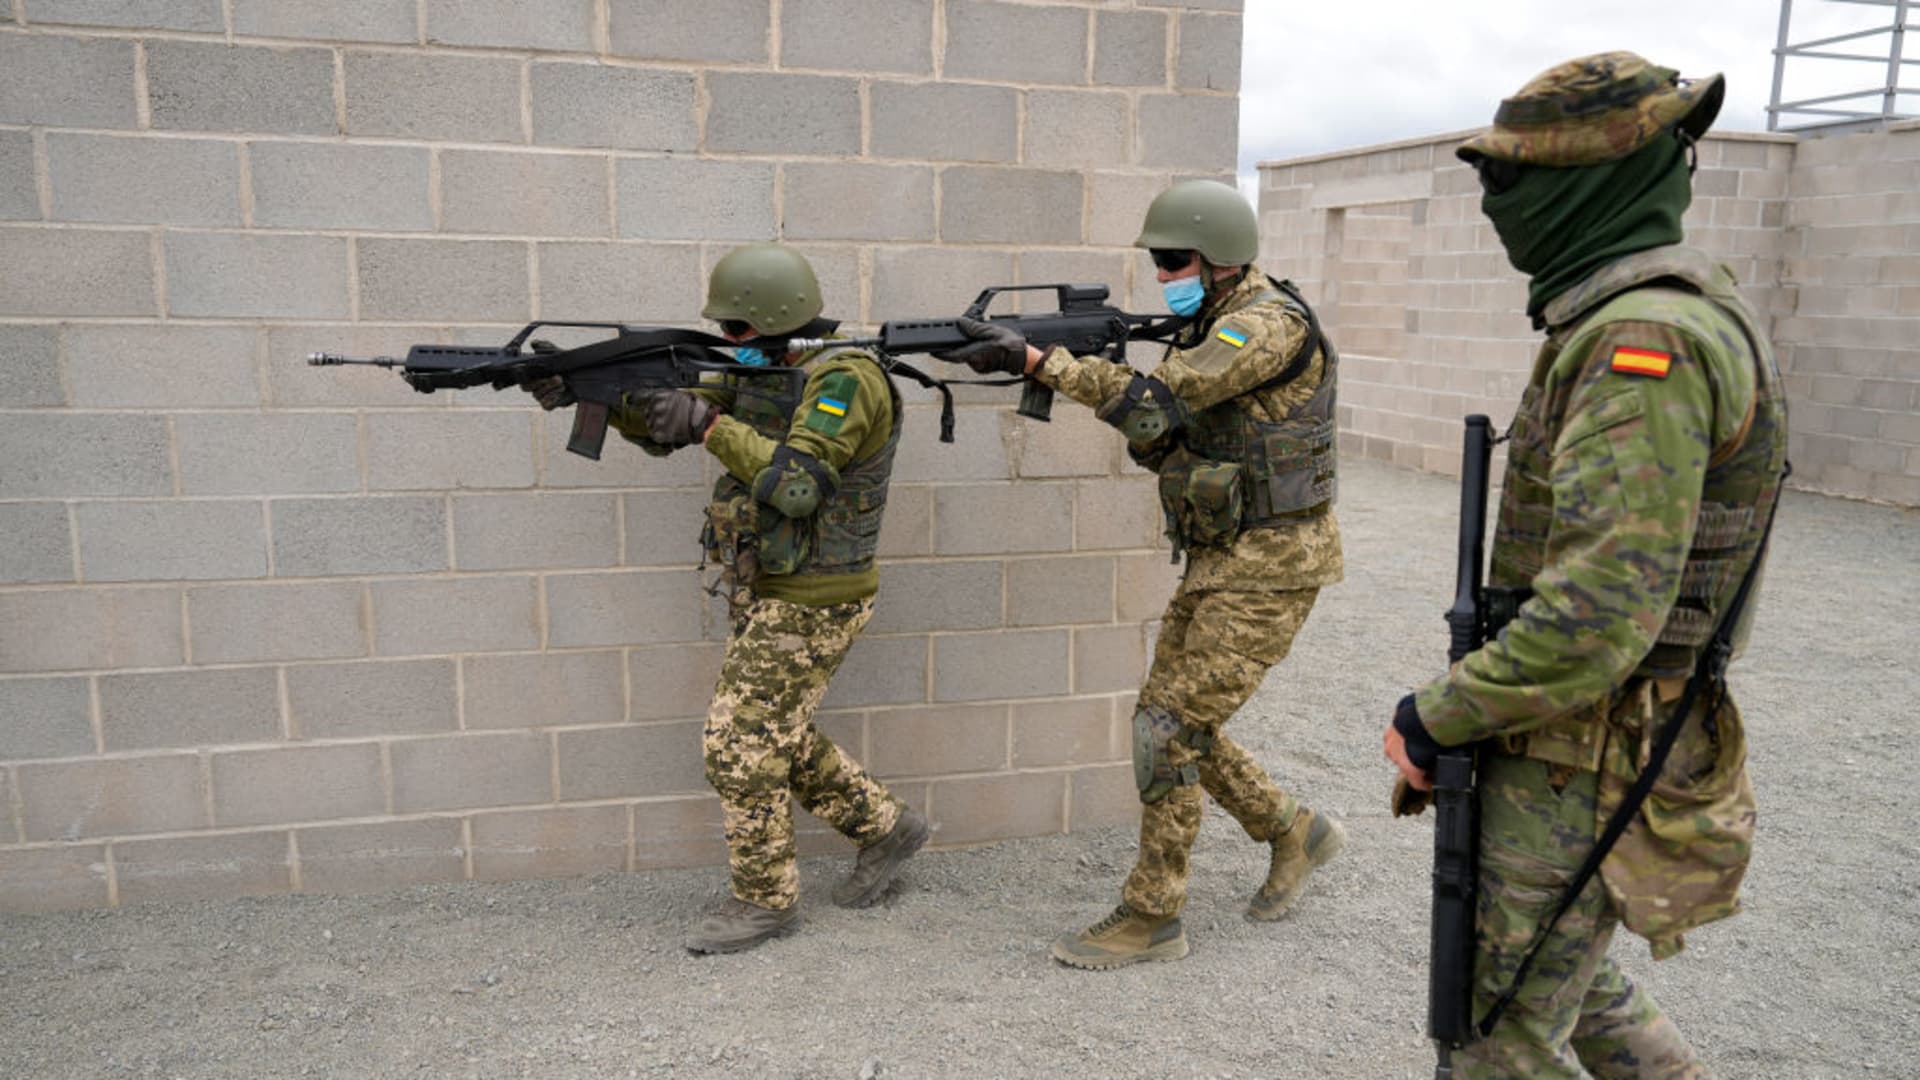 Armed Ukrainian military personnel take part in an urban warfare exercise, conducted by the Spanish military, at the Toledo infantry academy in Toledo, Spain, on Friday, March 24, 2023. 